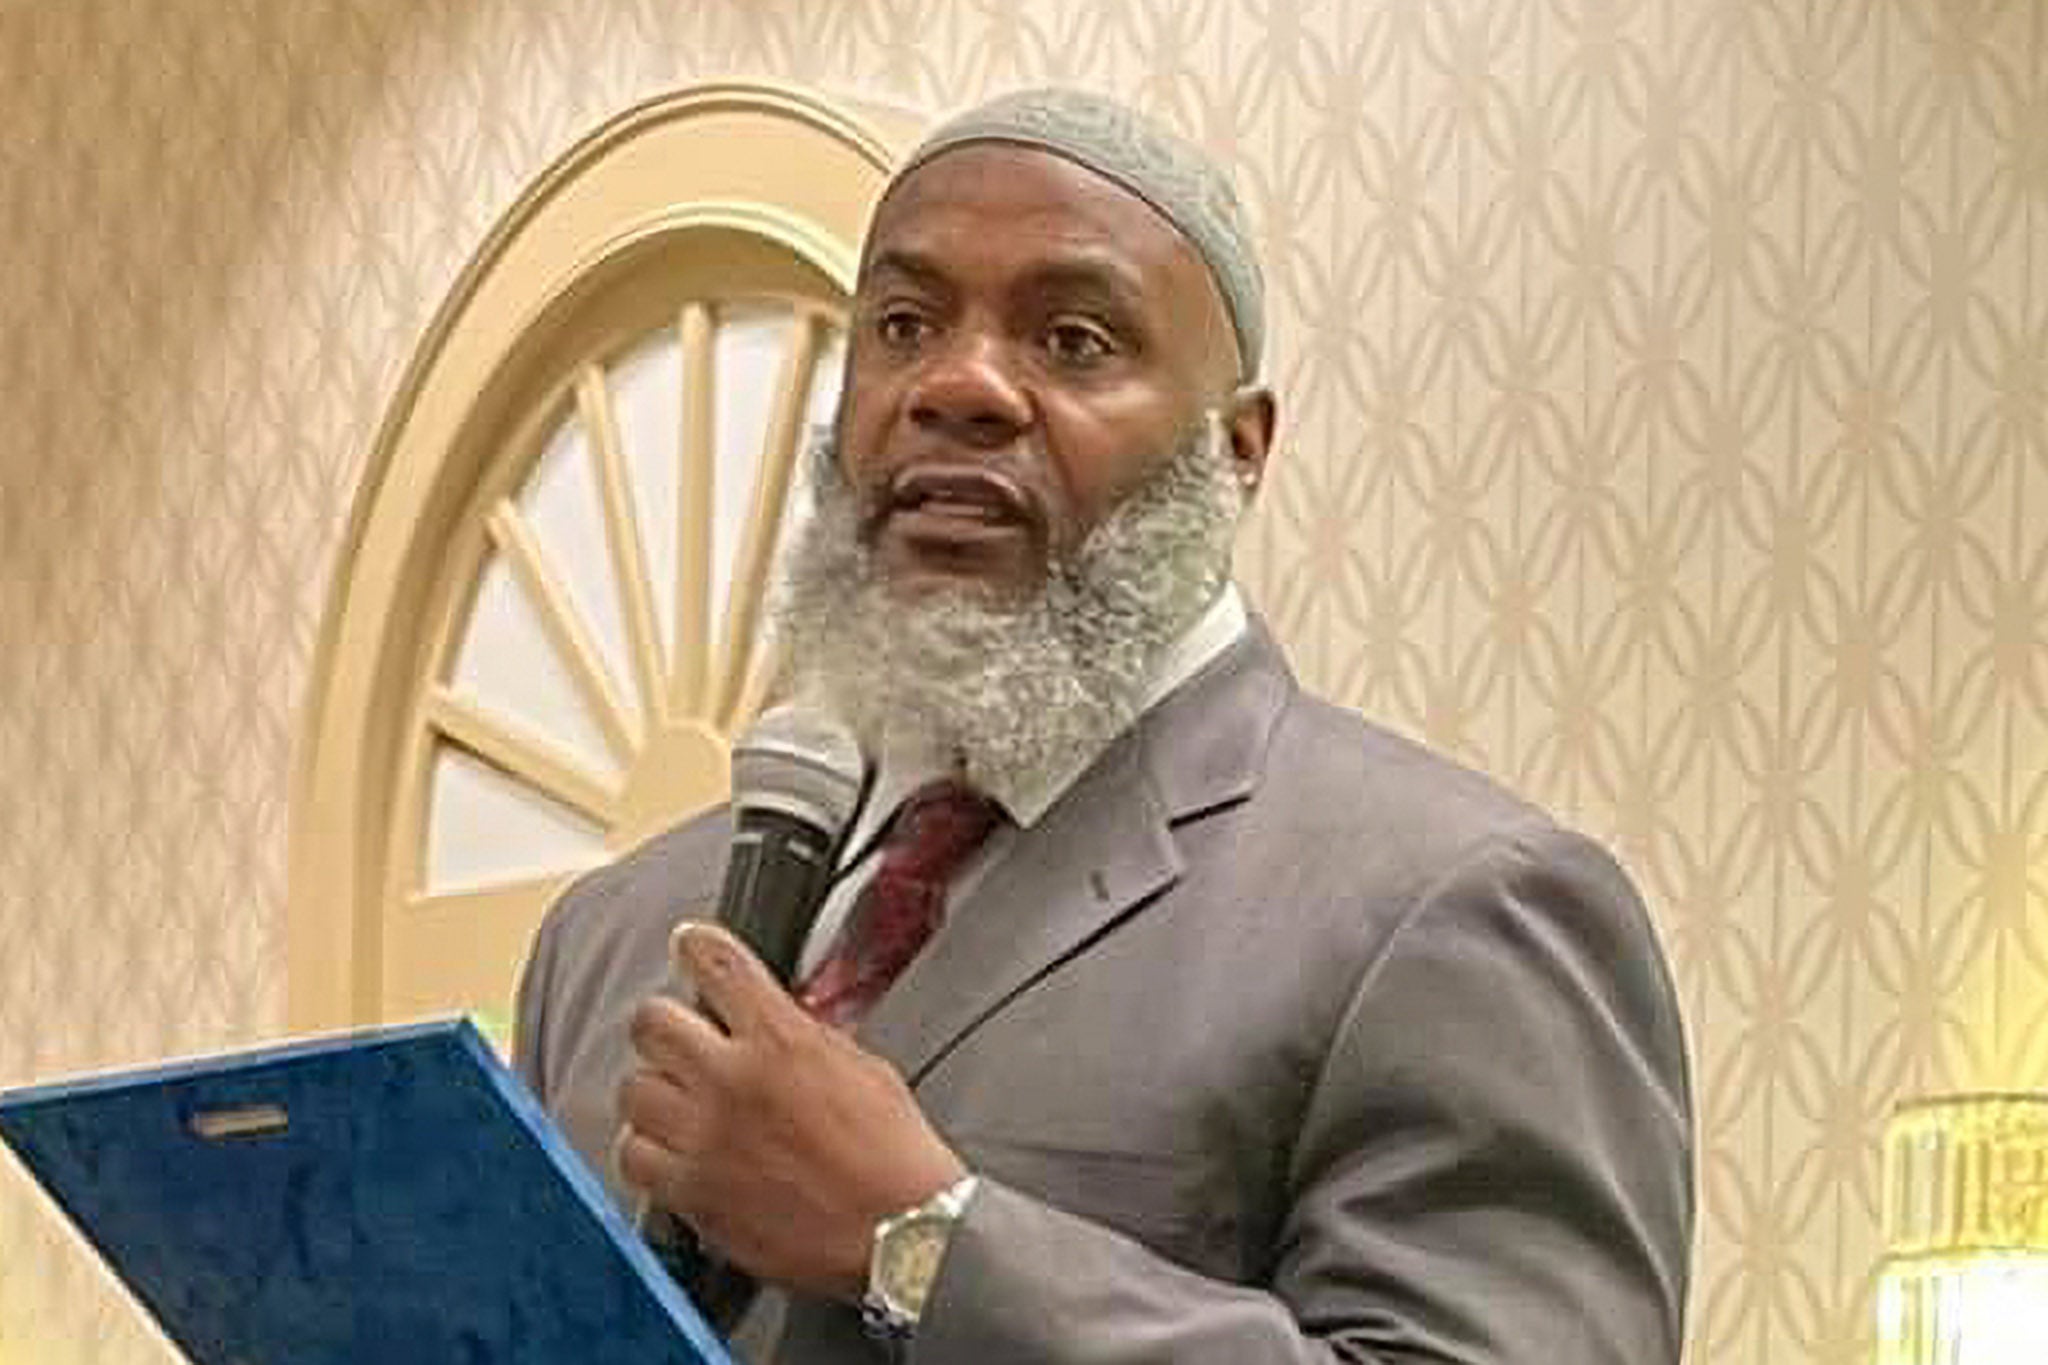 Imam Hassan Sharif was described as ‘a beacon of leadership and excellence’